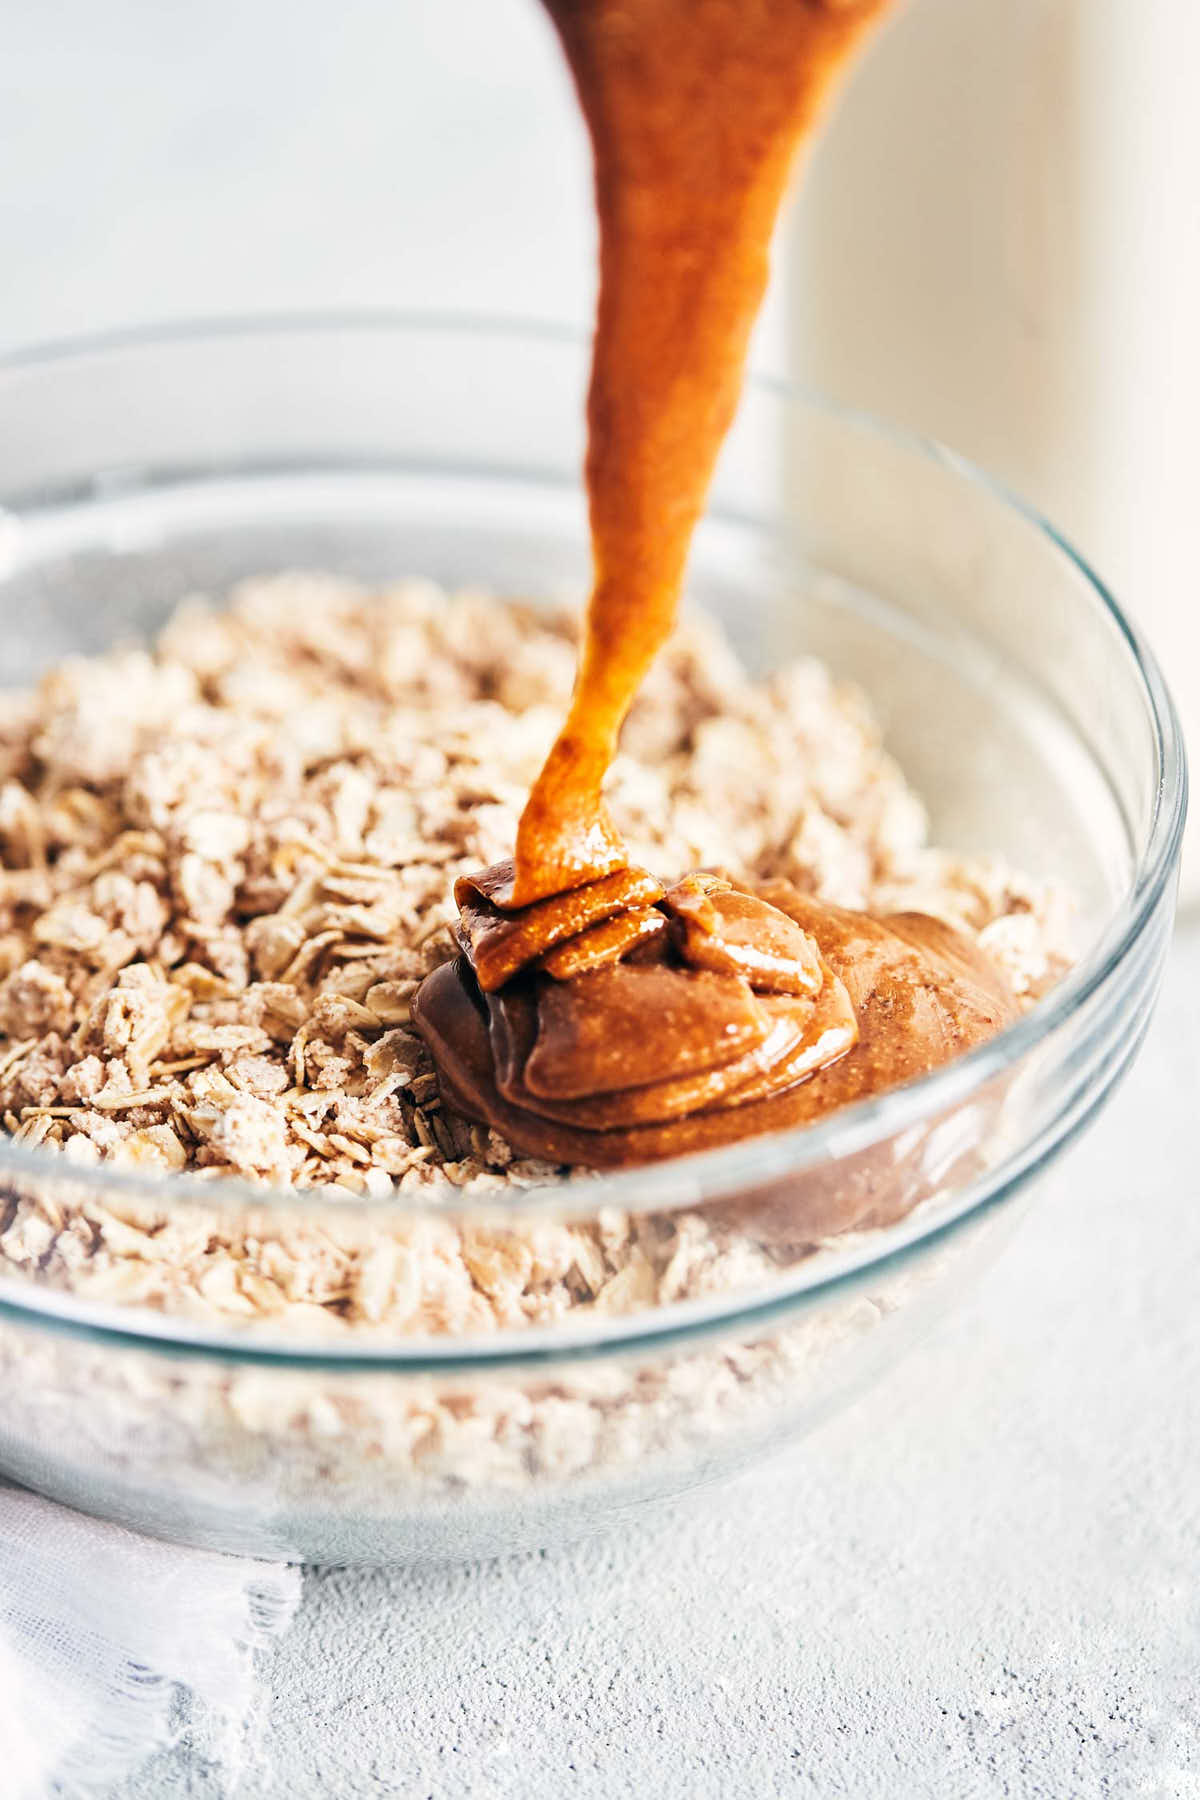 Almond butter being poured over oats